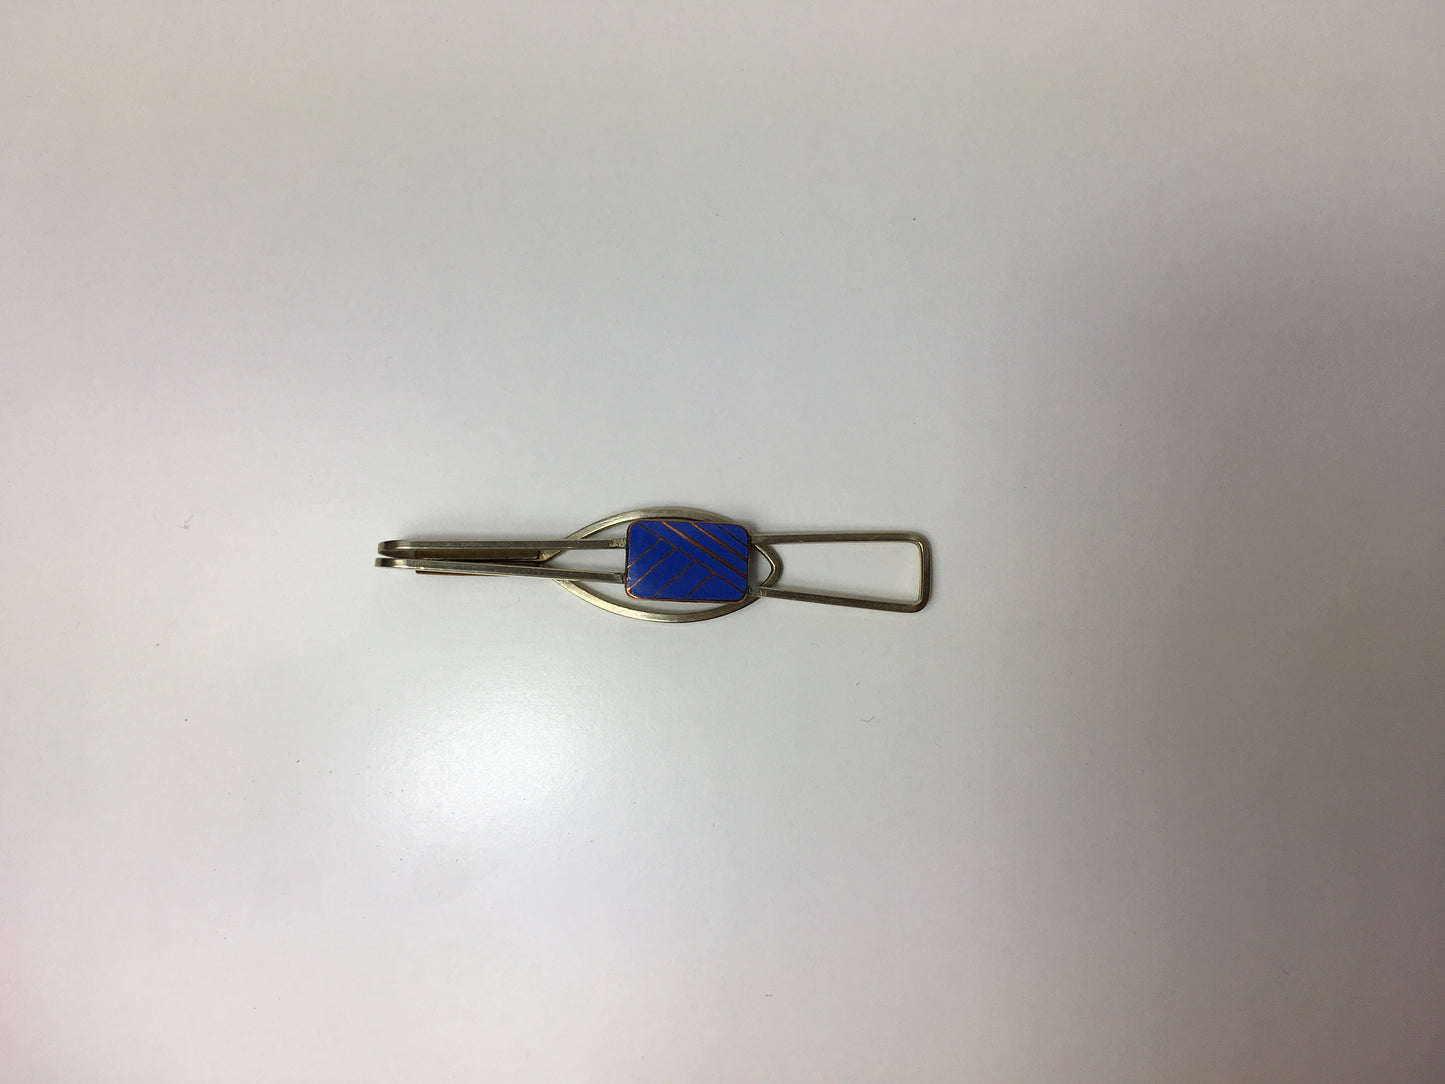 Original Gents Tie Pin - Lovely Shape and Has A contrast Geometric Blue to the Front